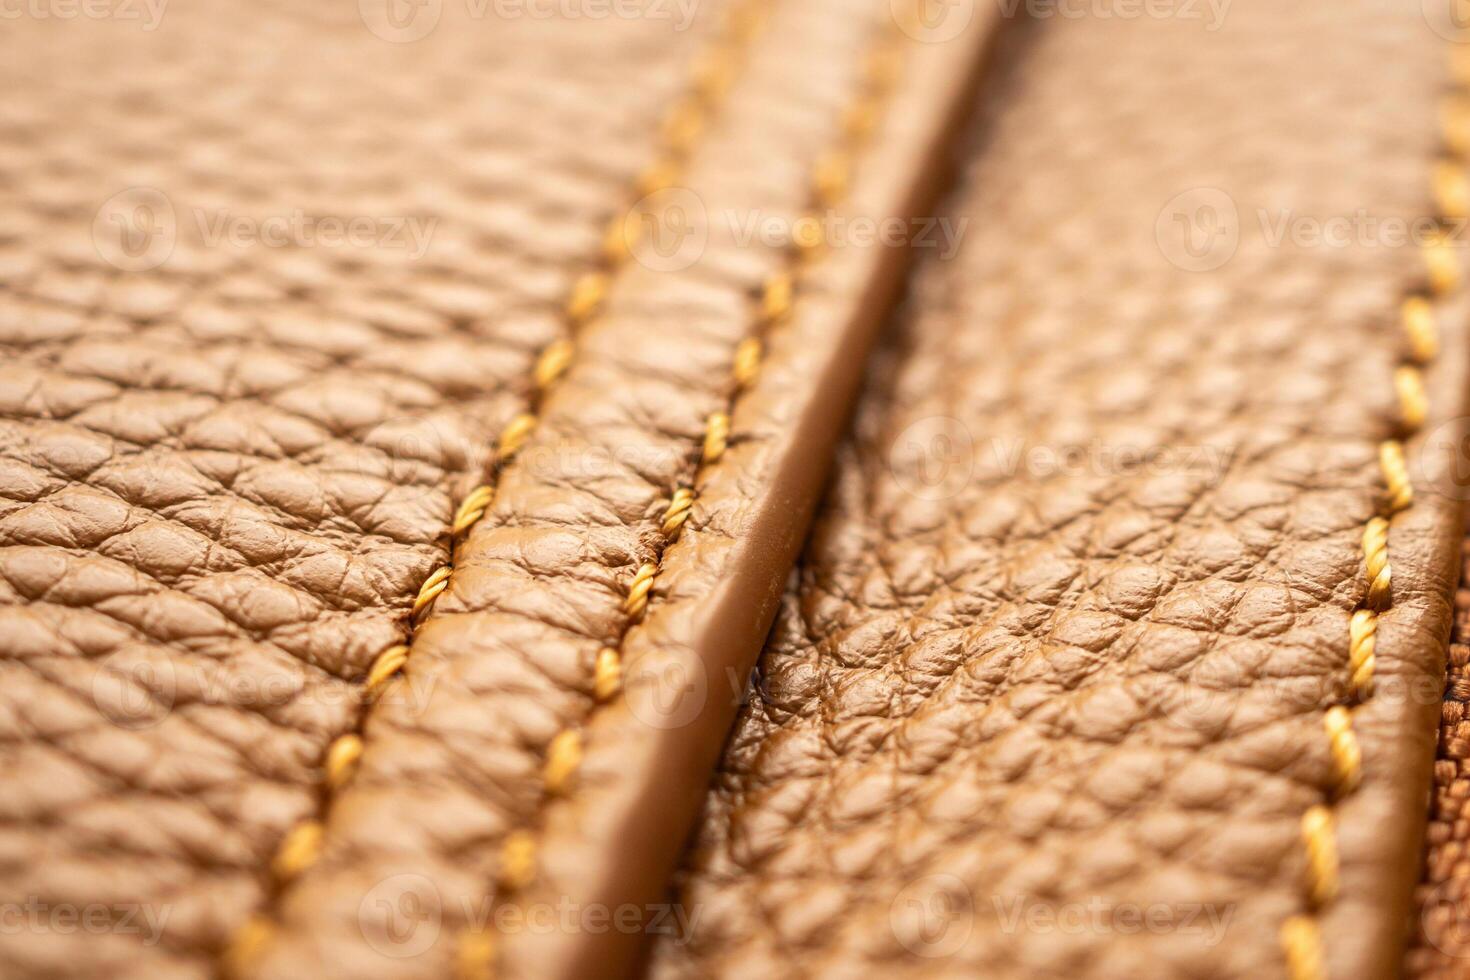 luxury brown leather bag texture background with stitching photo